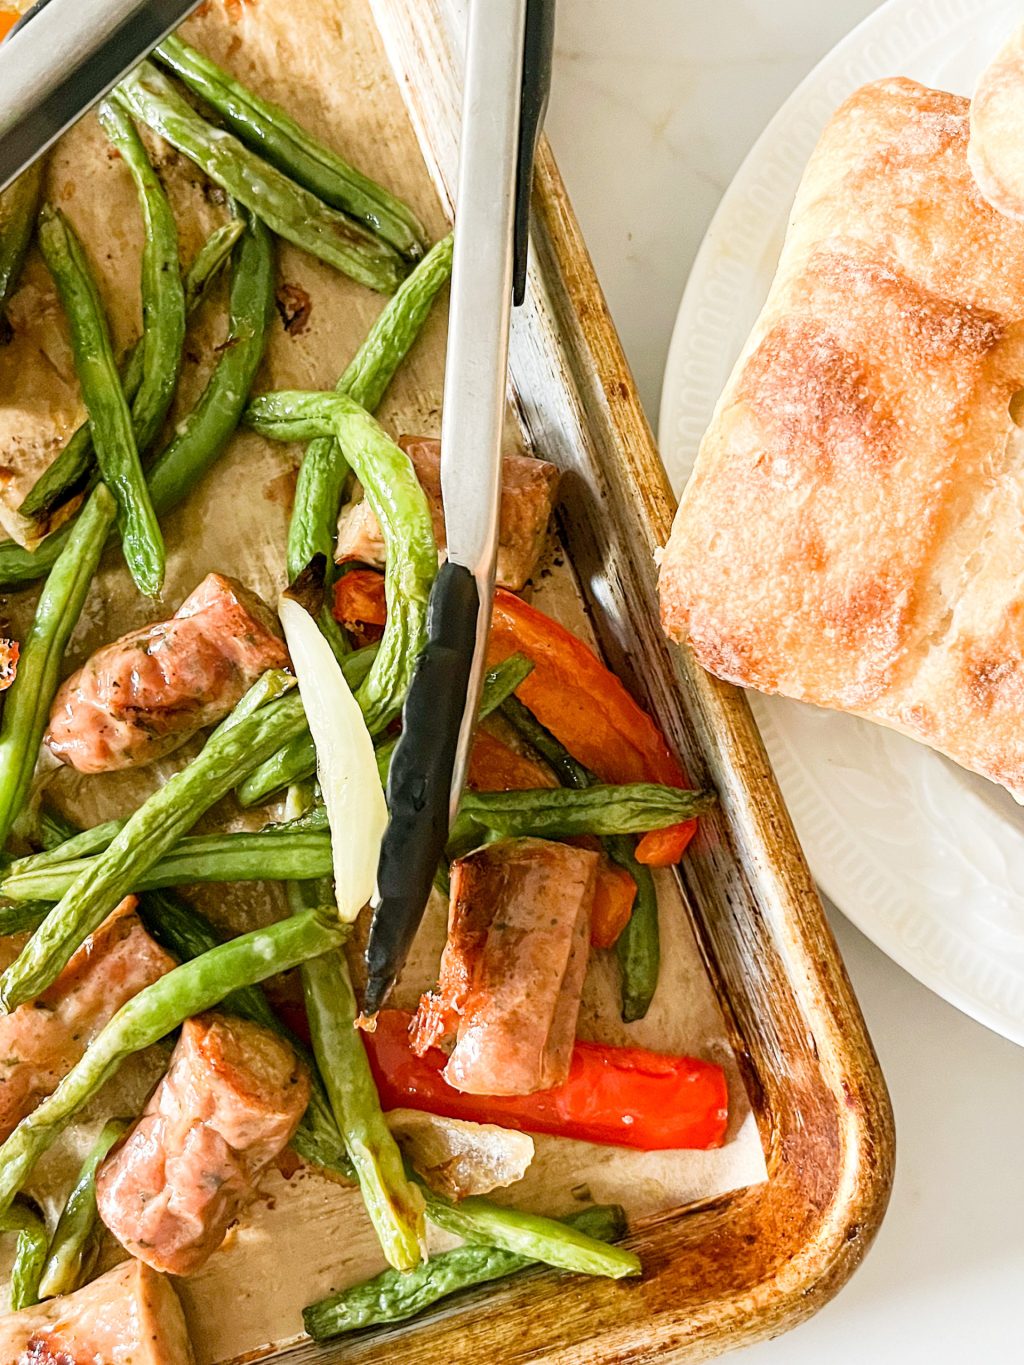 Sheet Pan Sausage and Peppers with Veggies